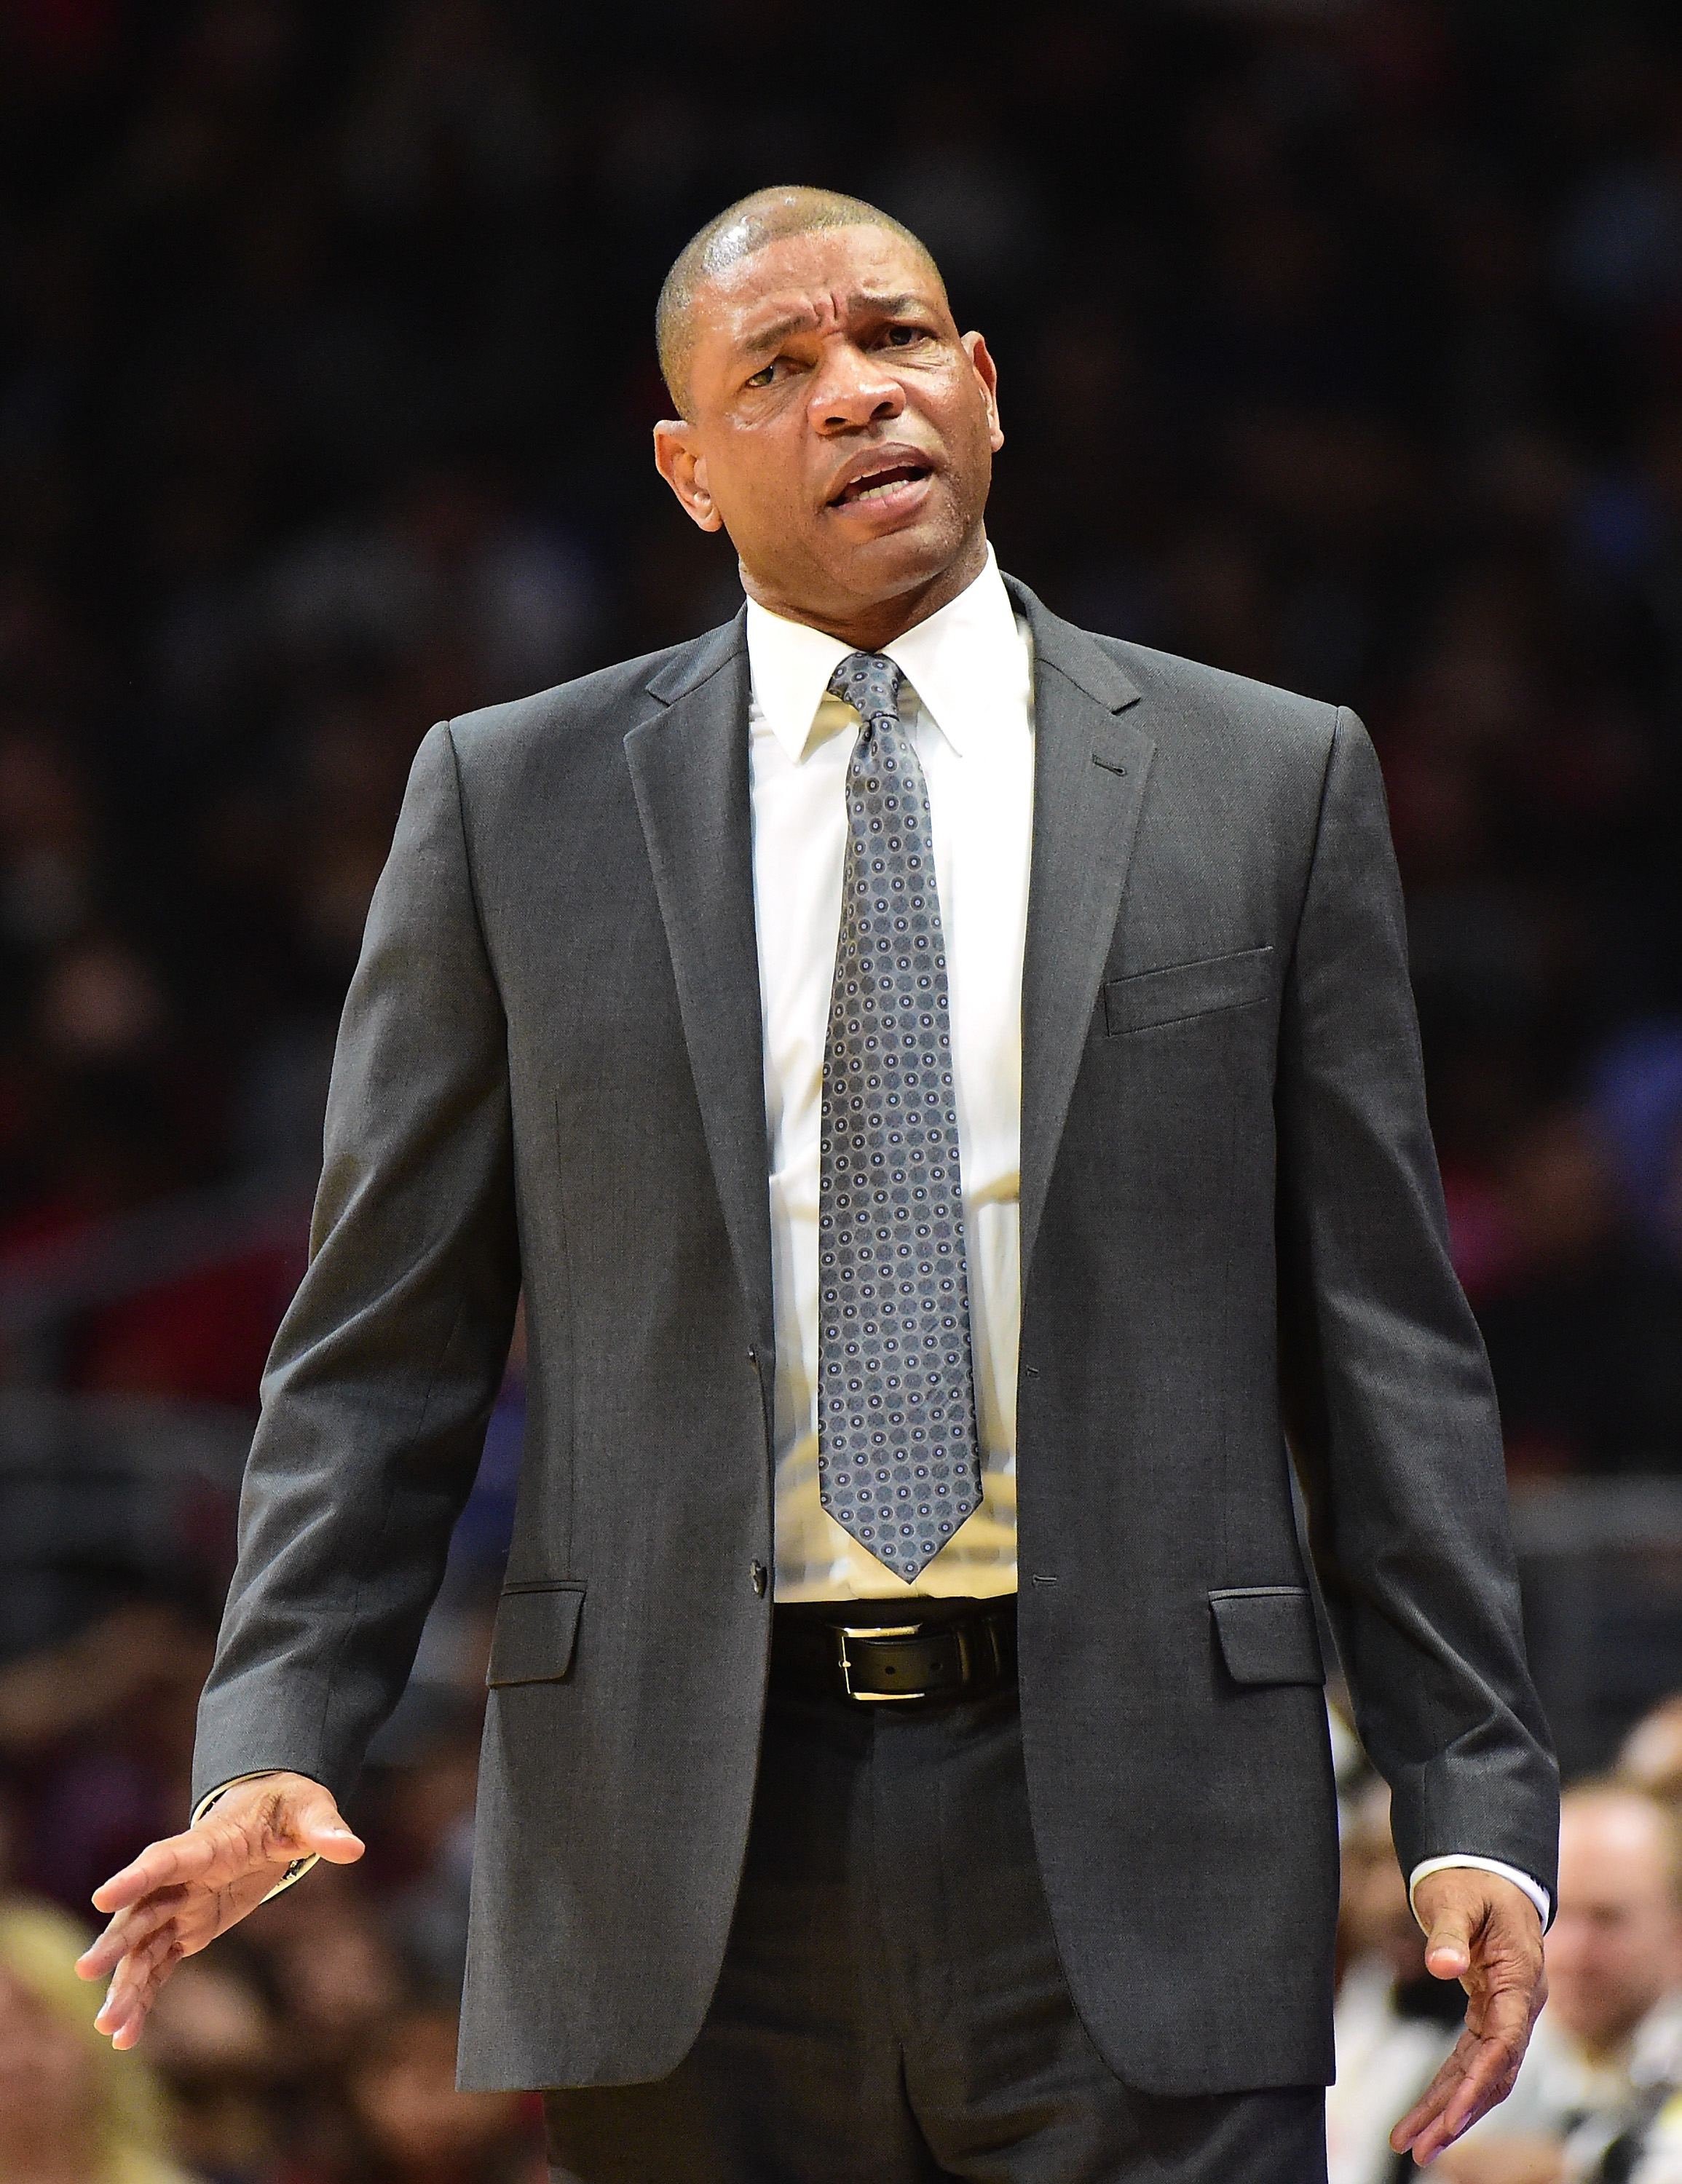 LOS ANGELES, CA - DECEMBER 21: Doc Rivers of the Los Angeles Clippers reacts to a Clipper foul during a 100-99 loss to the Oklahoma City Thunder at Staples Center on December 21, 2015 in Los Angeles, California. NOTE TO USER: User expressly acknowledges and agrees that, by downloading and or using this Photograph, user is consenting to the terms and condition of the Getty Images License Agreement.   Harry How/Getty Images/AFP